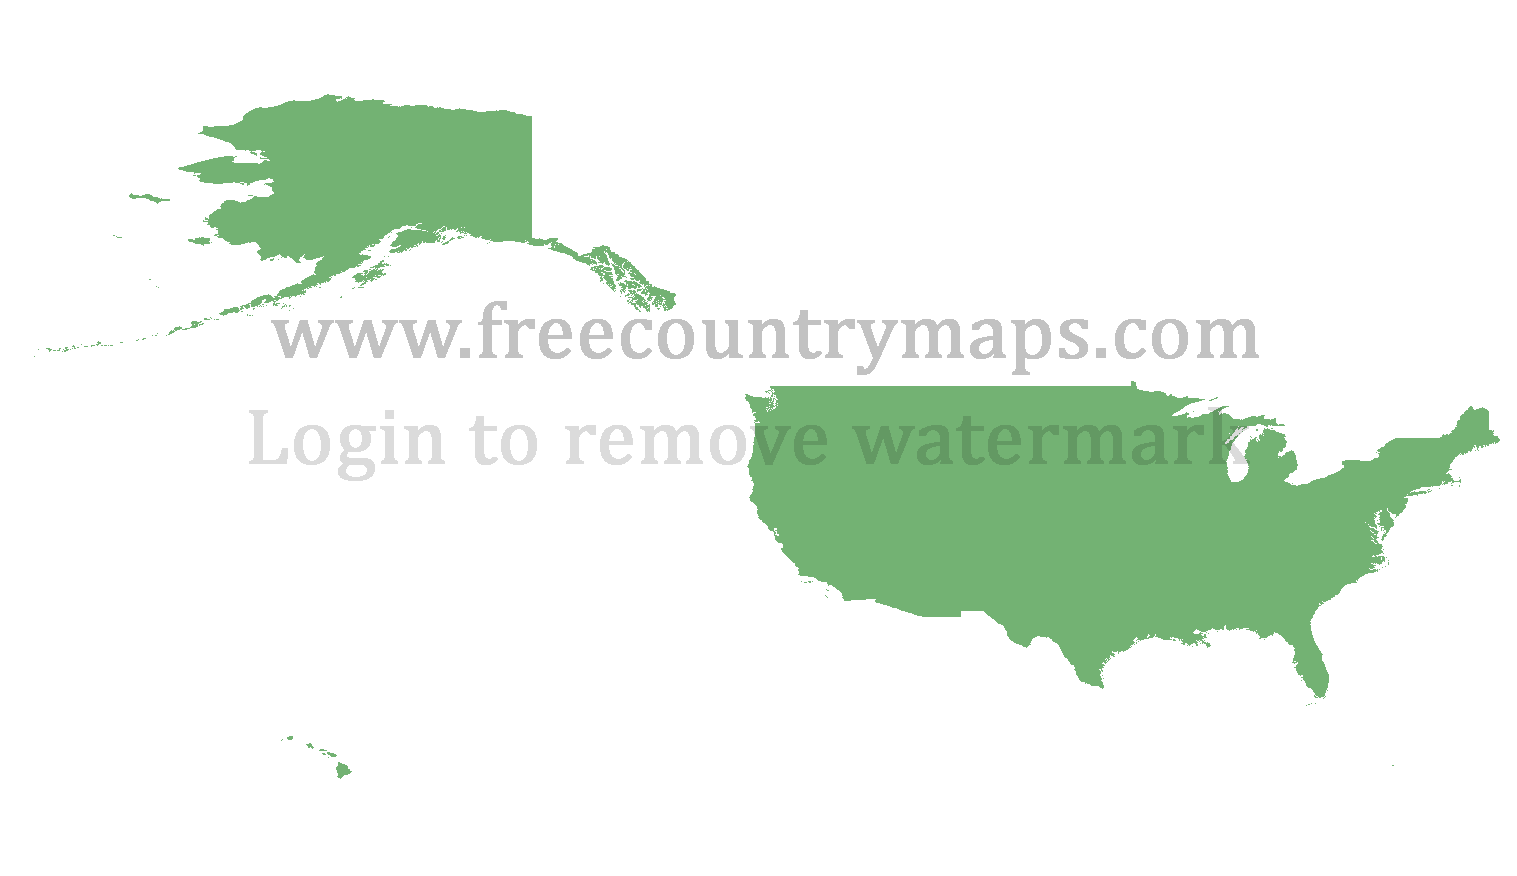 Blank Map of United States